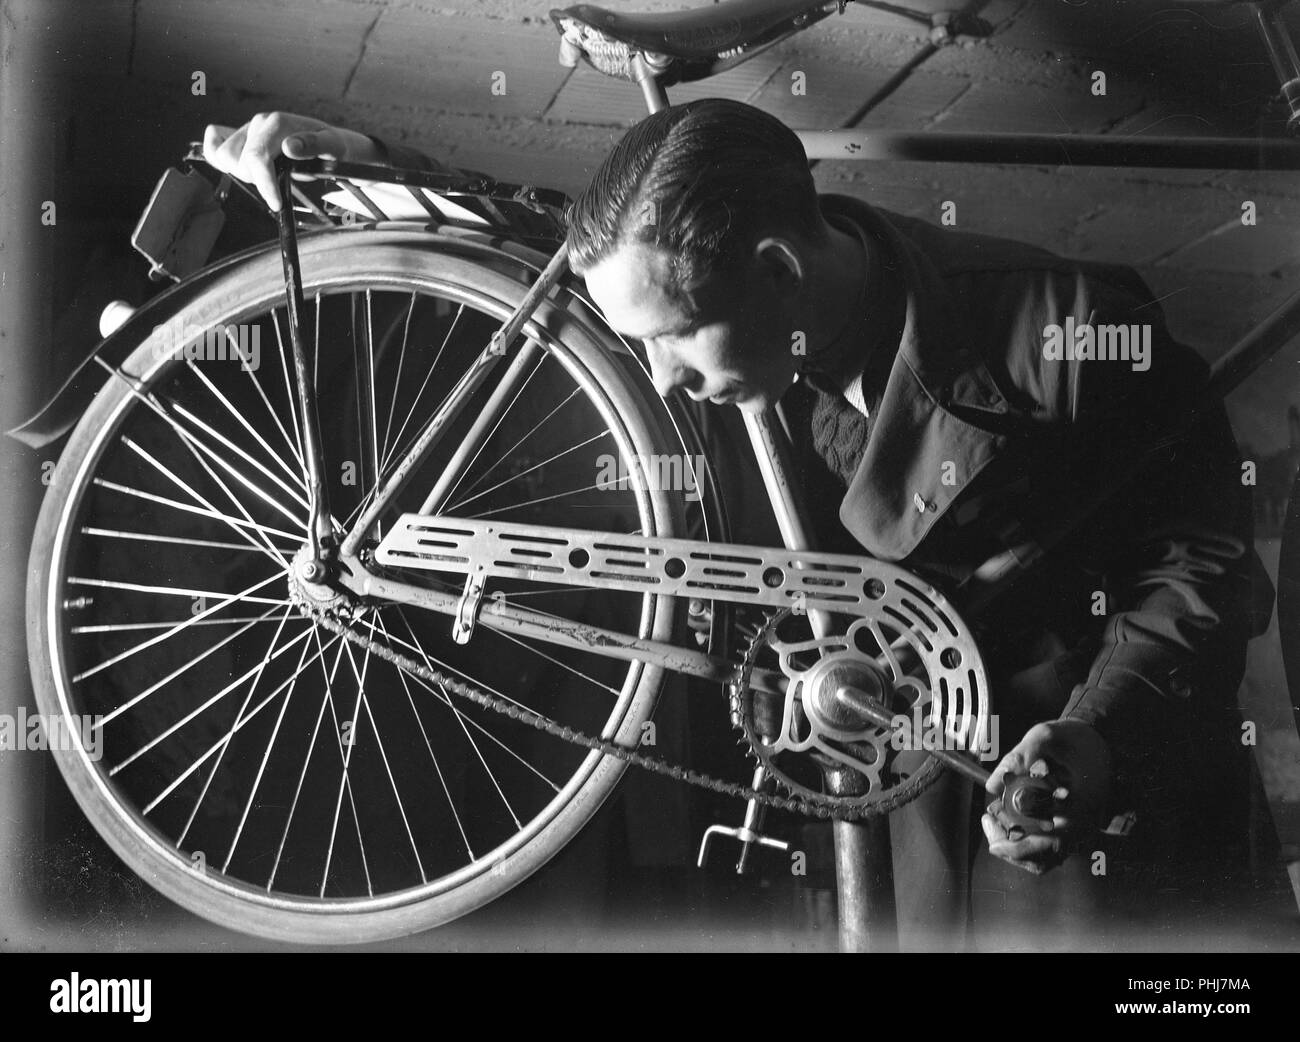 1940s man with bicycle. The Swedish athlete and olympic cyclist champion Ingvar Eriksson in his own bicycle shop where he sells and repairs bicycles. World War II has made petrol and oil expensive and rationed. Bicycles quickly became the most common means of transportation.  2 June 1940. Photo Kristoffersson 150-8 Stock Photo